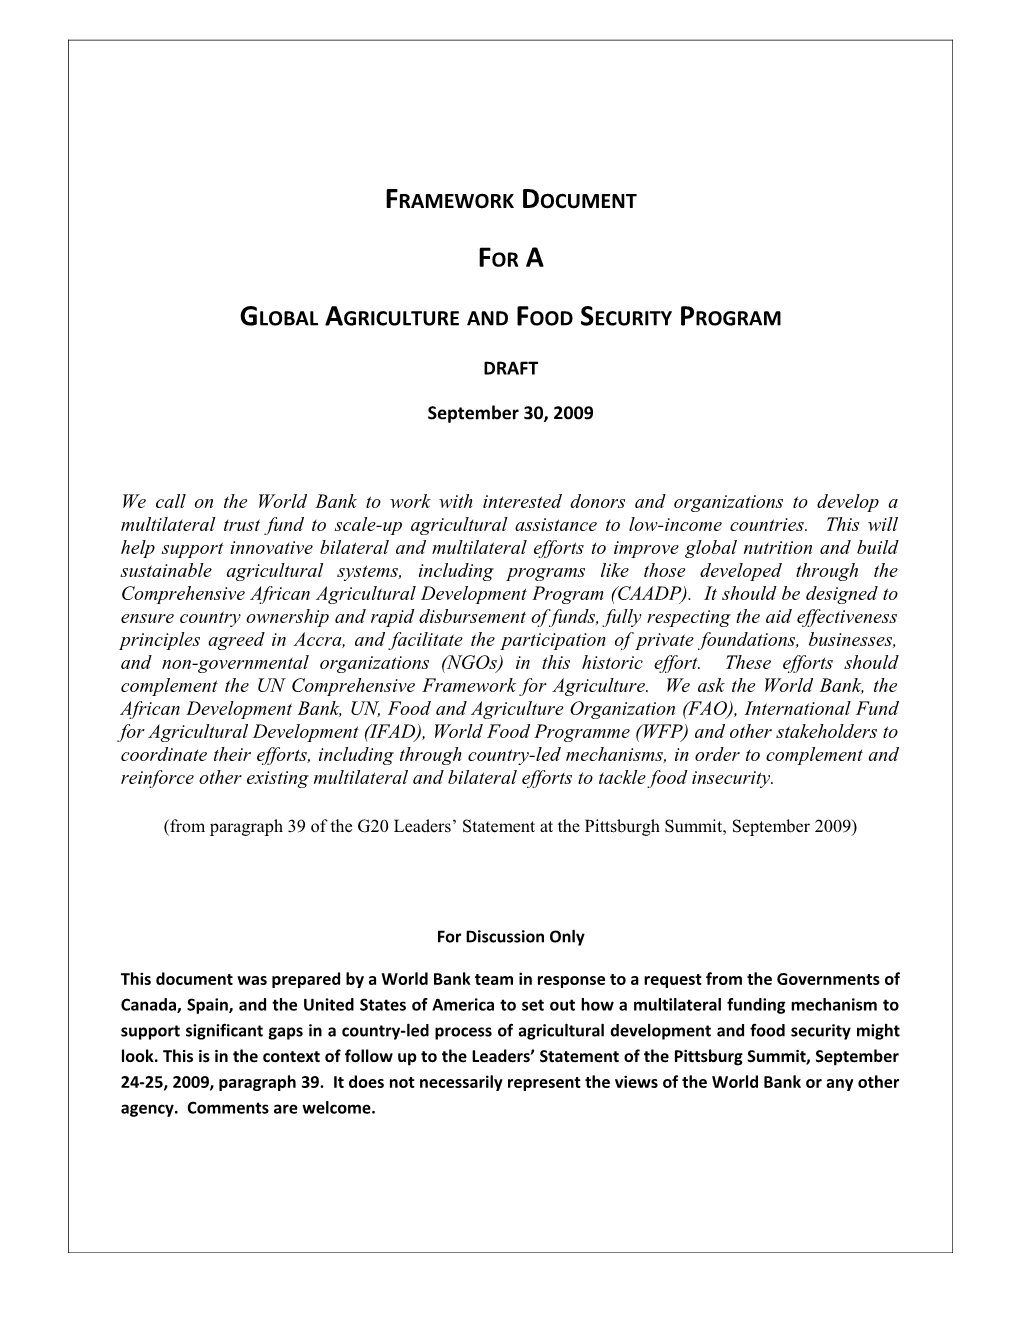 Global Agriculture and Food Security Program